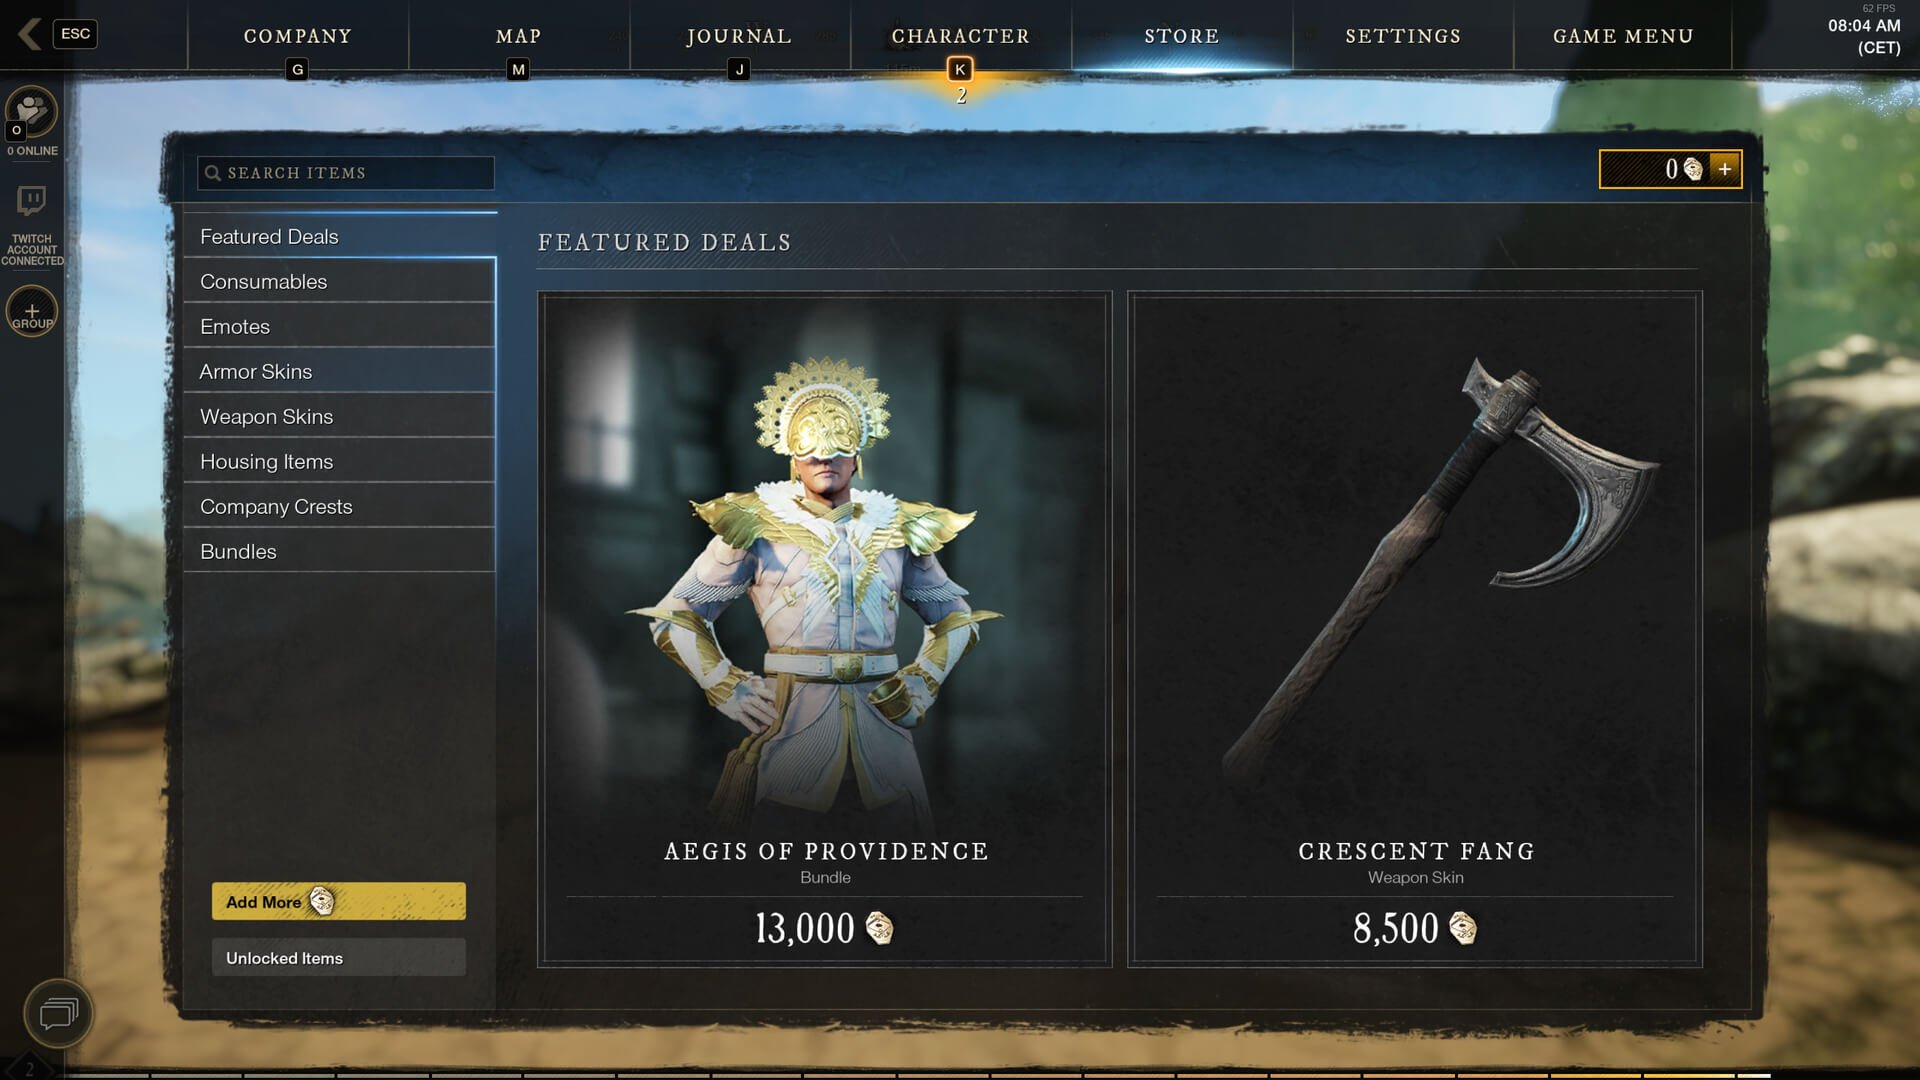 A screenshot from the in-game premium shop for New World.